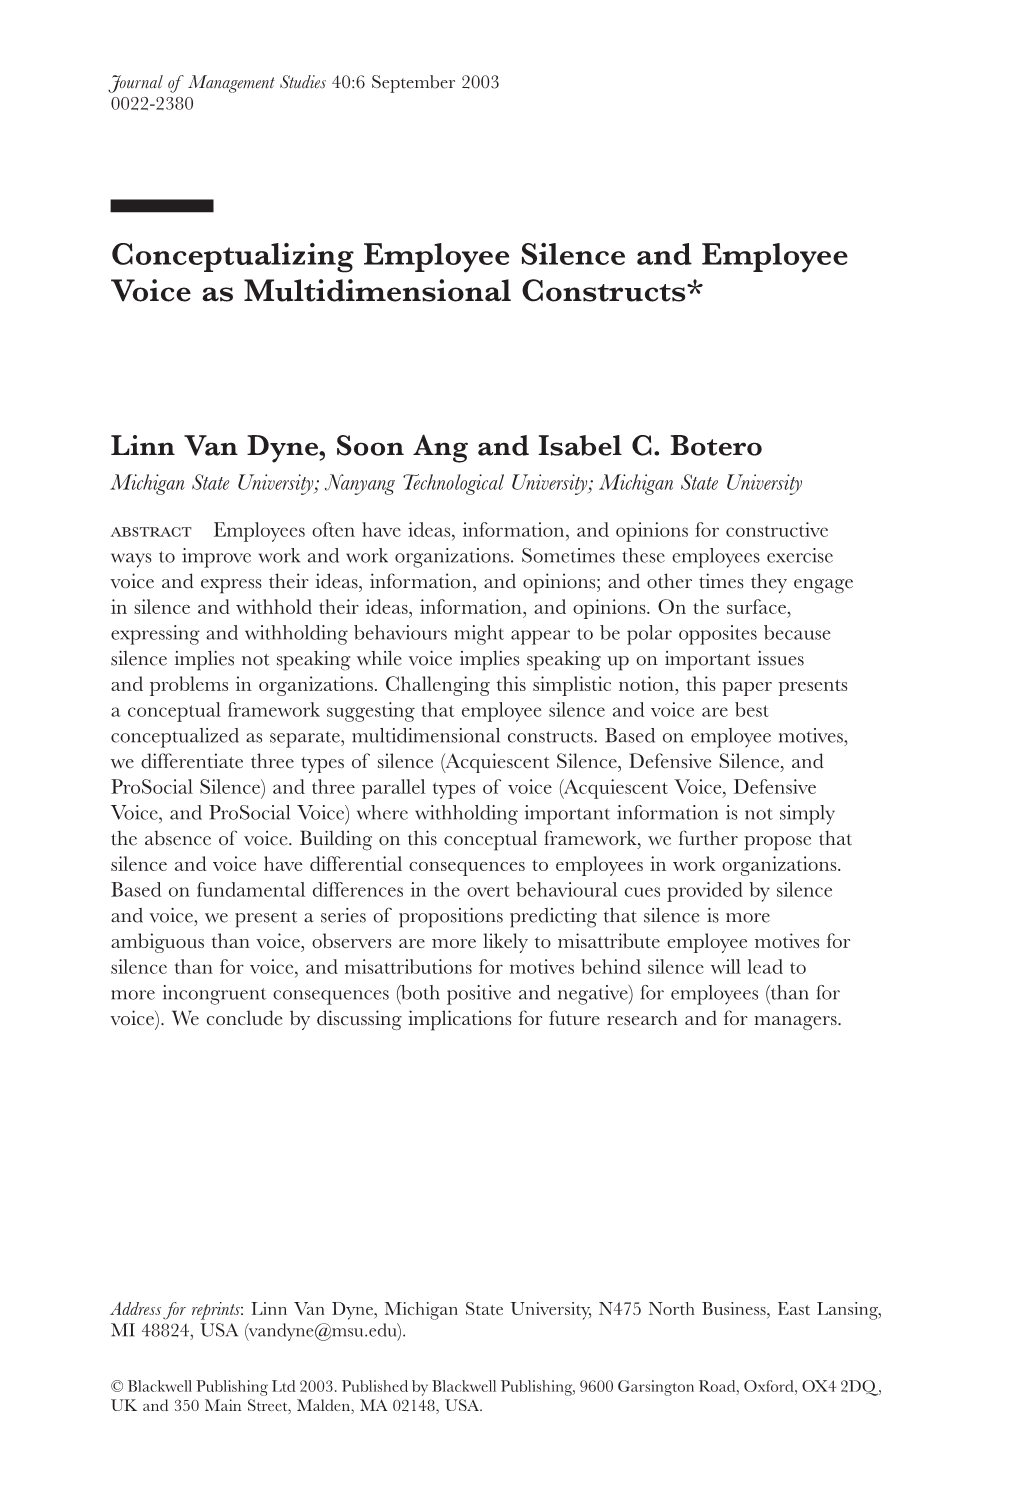 Conceptualizing Employee Silence and Employee Voice As Multidimensional Constructs*